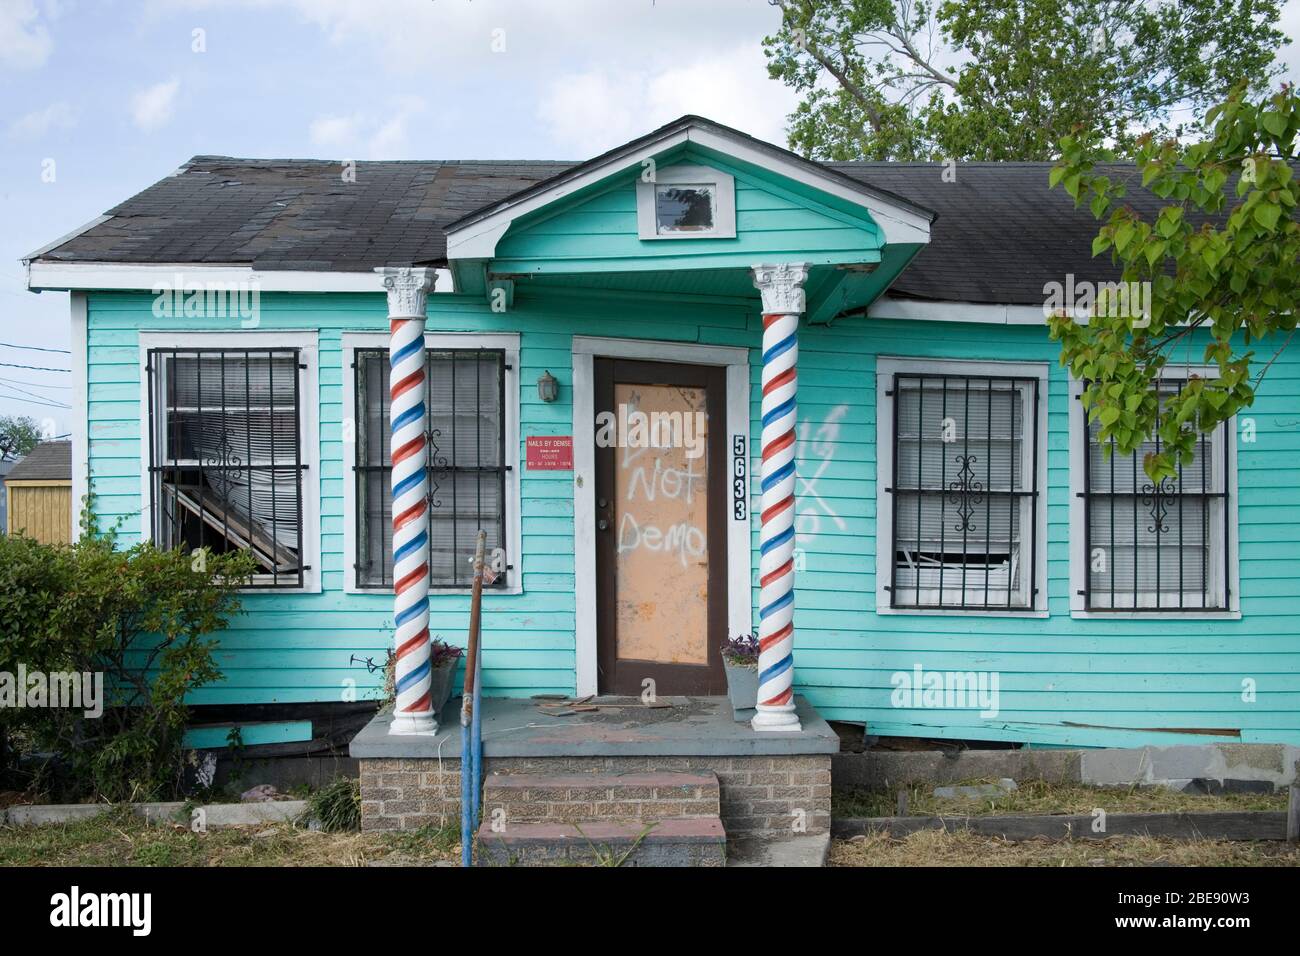 'Barber Shop damaged by Hurricane Katrina, 2005, located in Ninth Ward, New Orleans, Louisiana; 12 April 2006; Carol M. Highsmith's America, Library of Congress, Prints and Photographs Division. [1]; Carol M. Highsmith  (1946–)        Alternative names  Birth name: Carol Louise McKinney   Artist name: Carol M. HighsmithCarol McKinney Highsmith  Description American photographer and architectural photographer  Date of birth  18 May 1946   Location of birth  Leaksville, North Carolina   Work period 1981-  Work location  United States of America  Authority control  : Q5044454 VIAF: 84615840 ISNI: Stock Photo